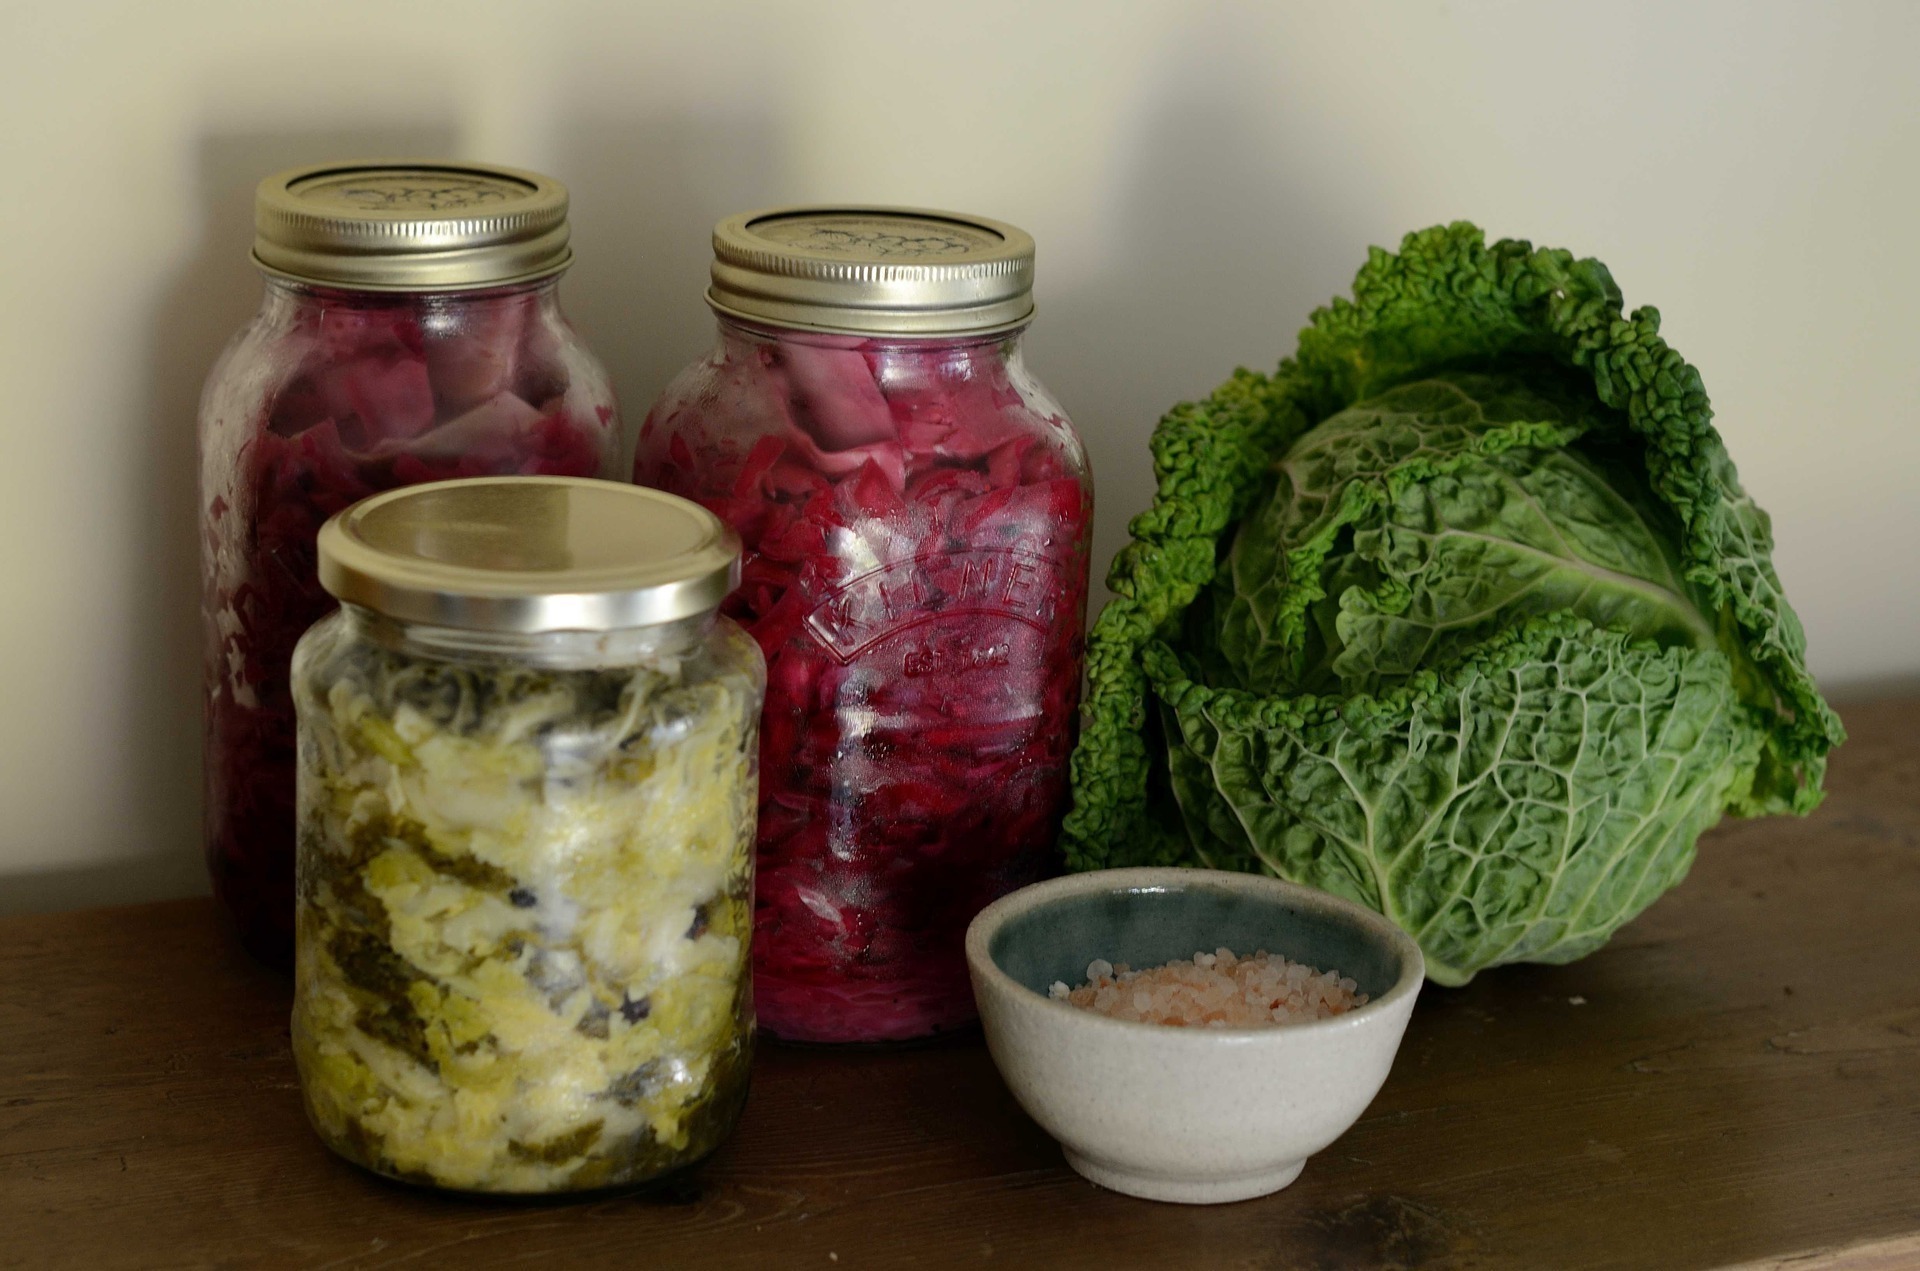 Probiotic supplements are a very big industry. Find out just how they stack up to fermented foods so you can make informed choices towards your health.